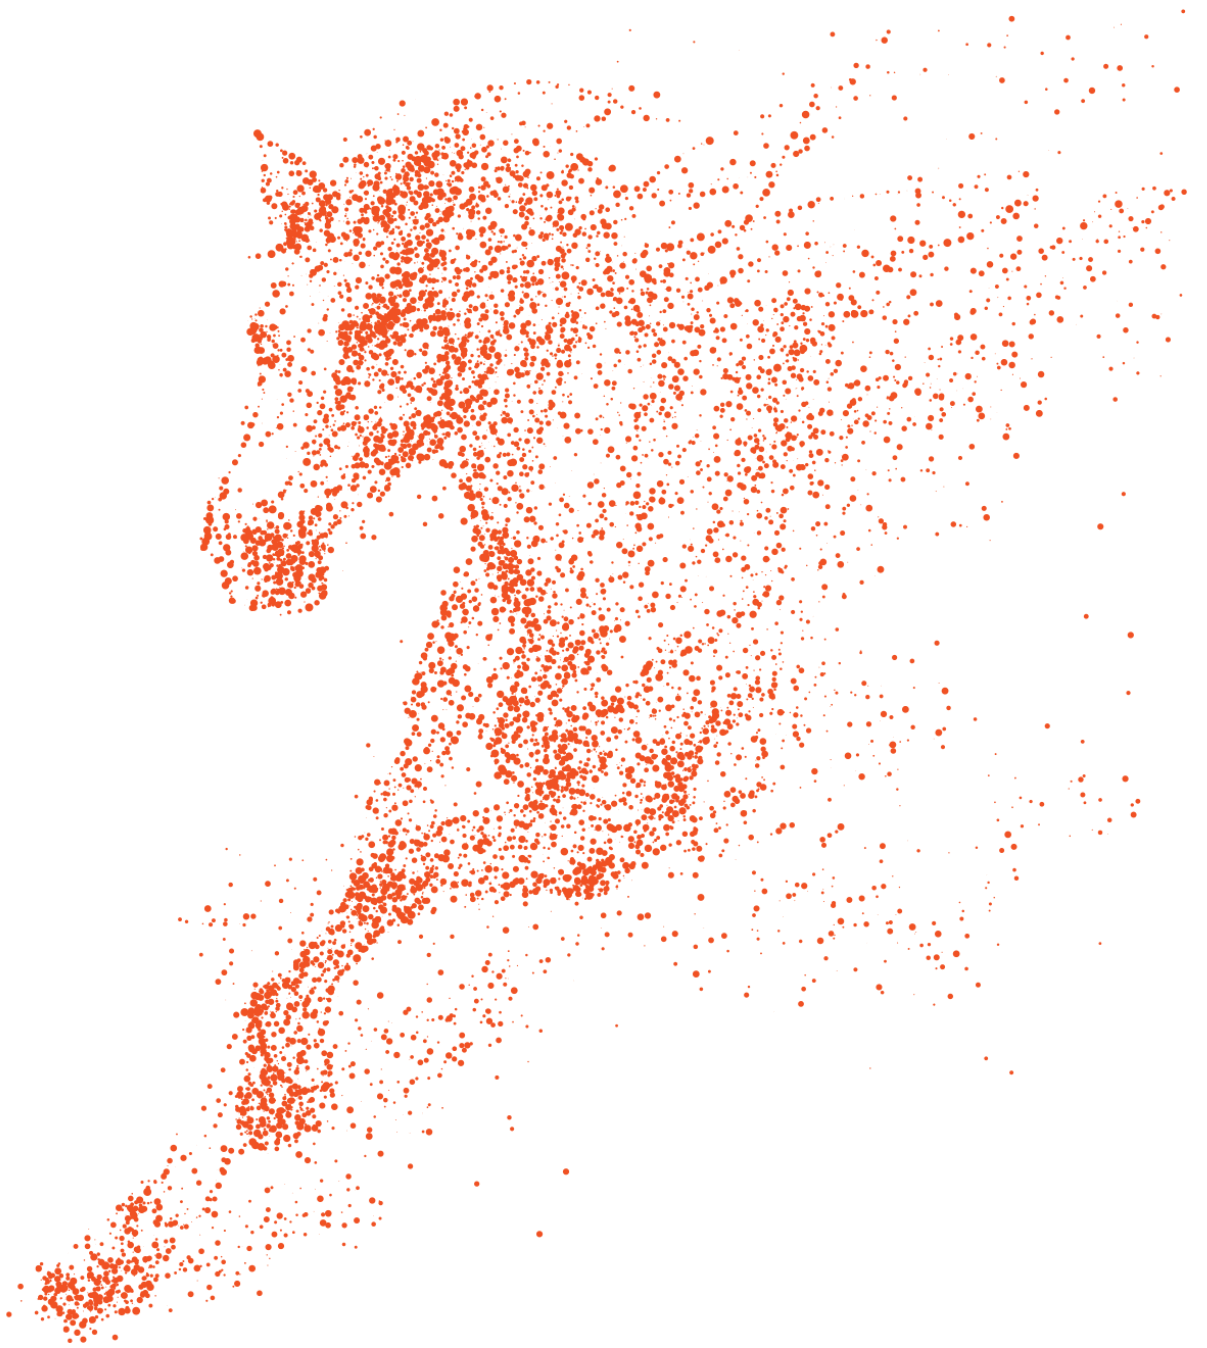 Orange galloping horse composed of particles.